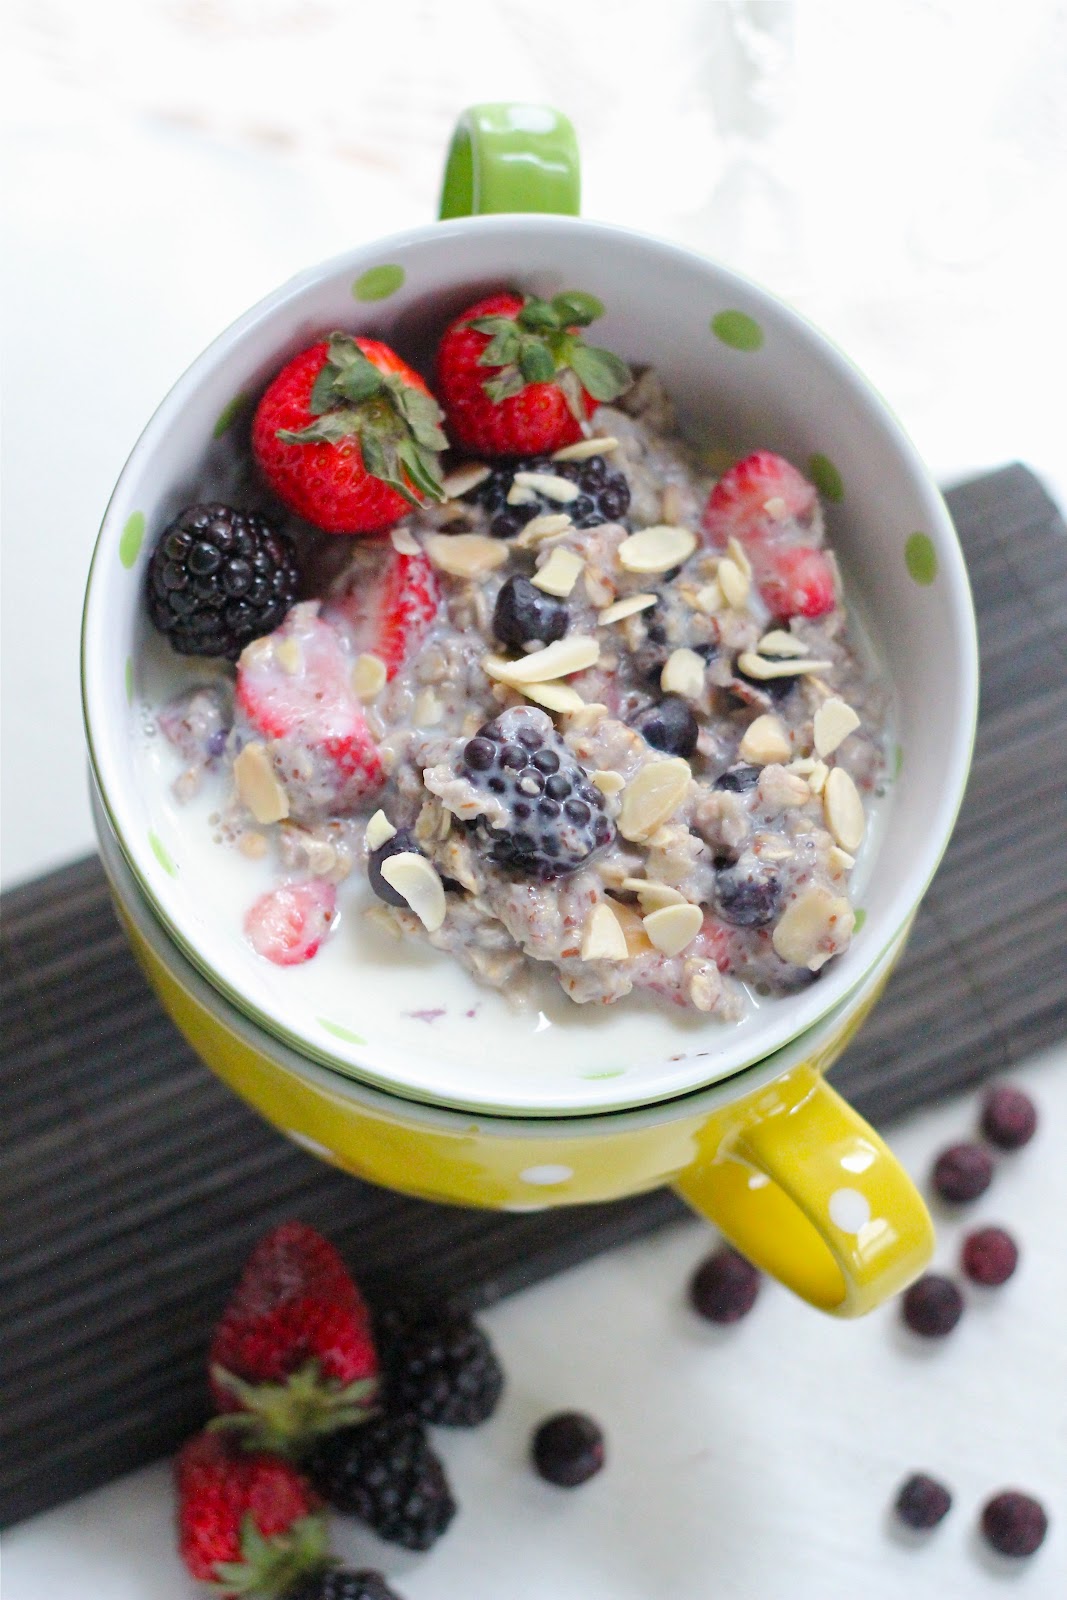 Mixed berry and almond breakfast oatmeal | Eat Good 4 Life